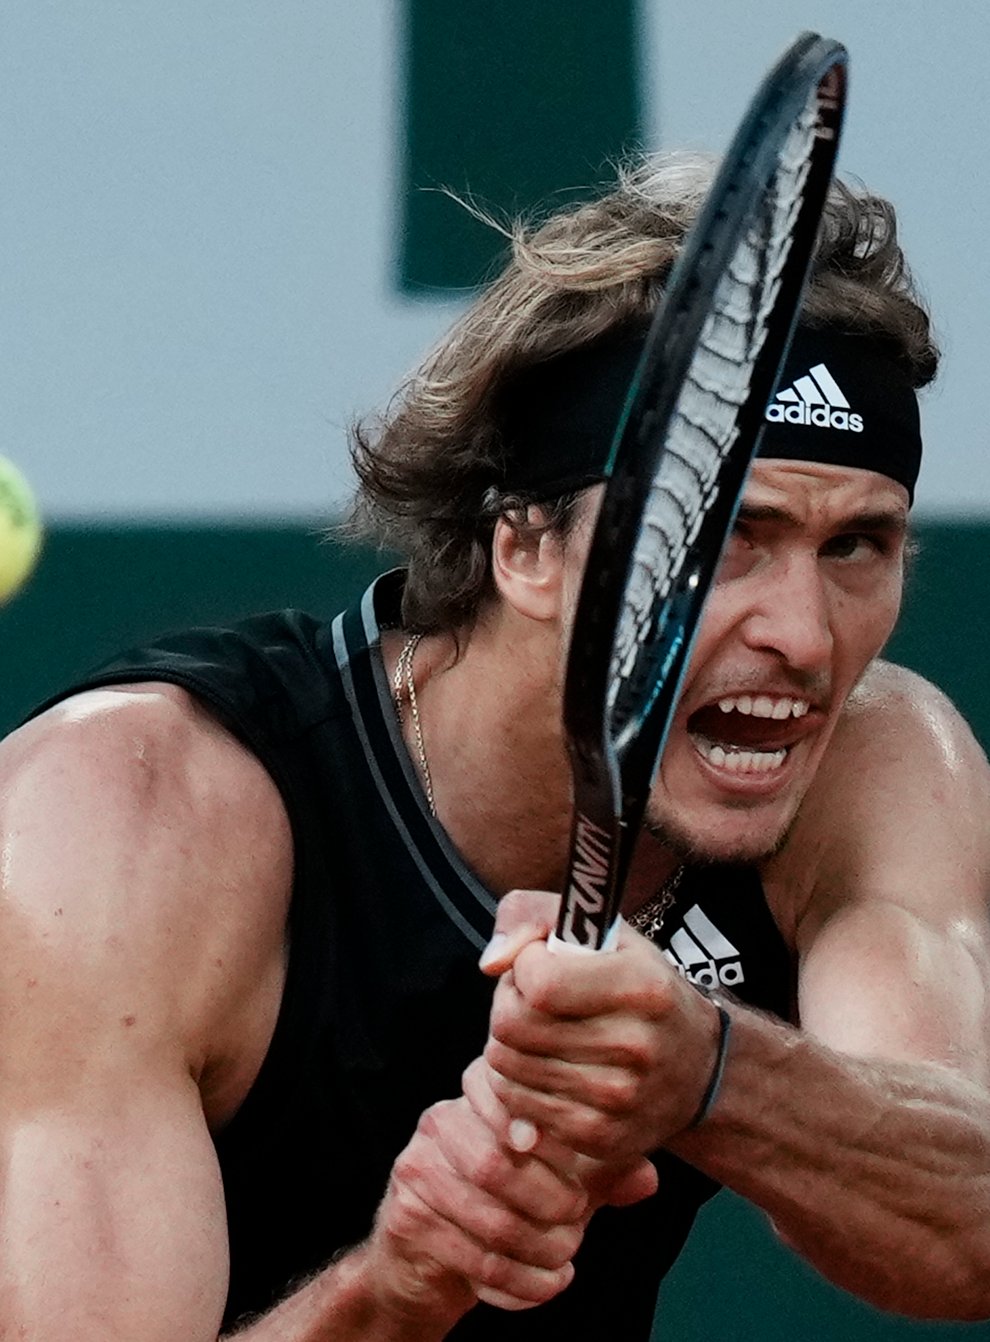 Germany’s Alexander Zverev in action at the French Open